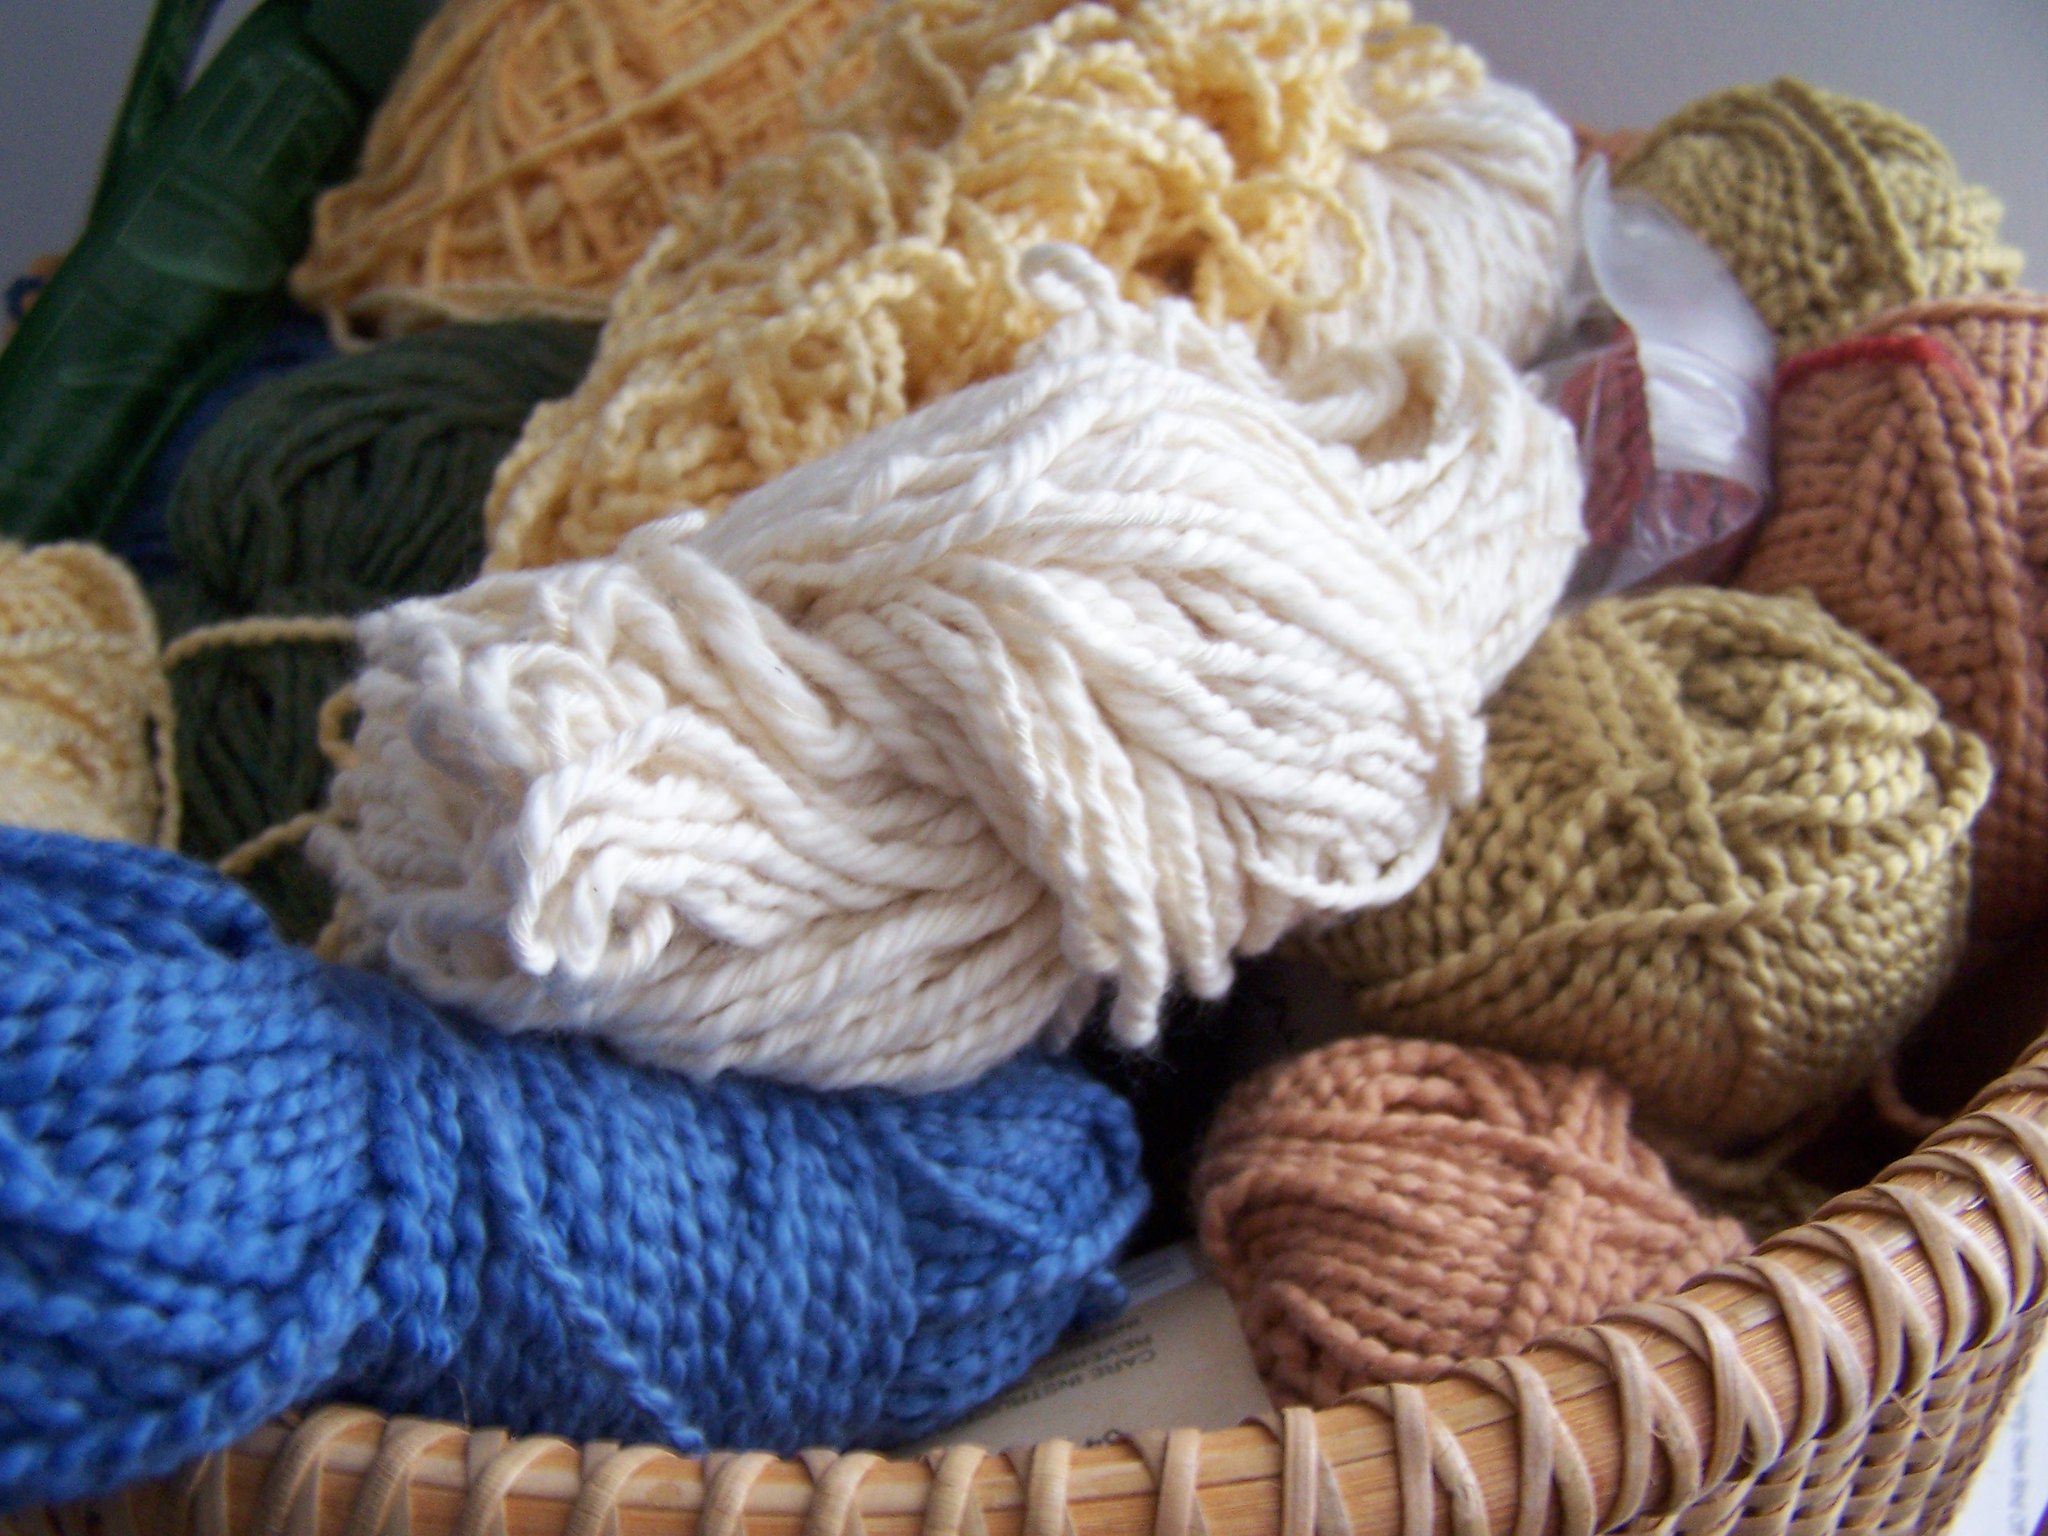 Different colored yarn in a basket | Source: Flickr.com